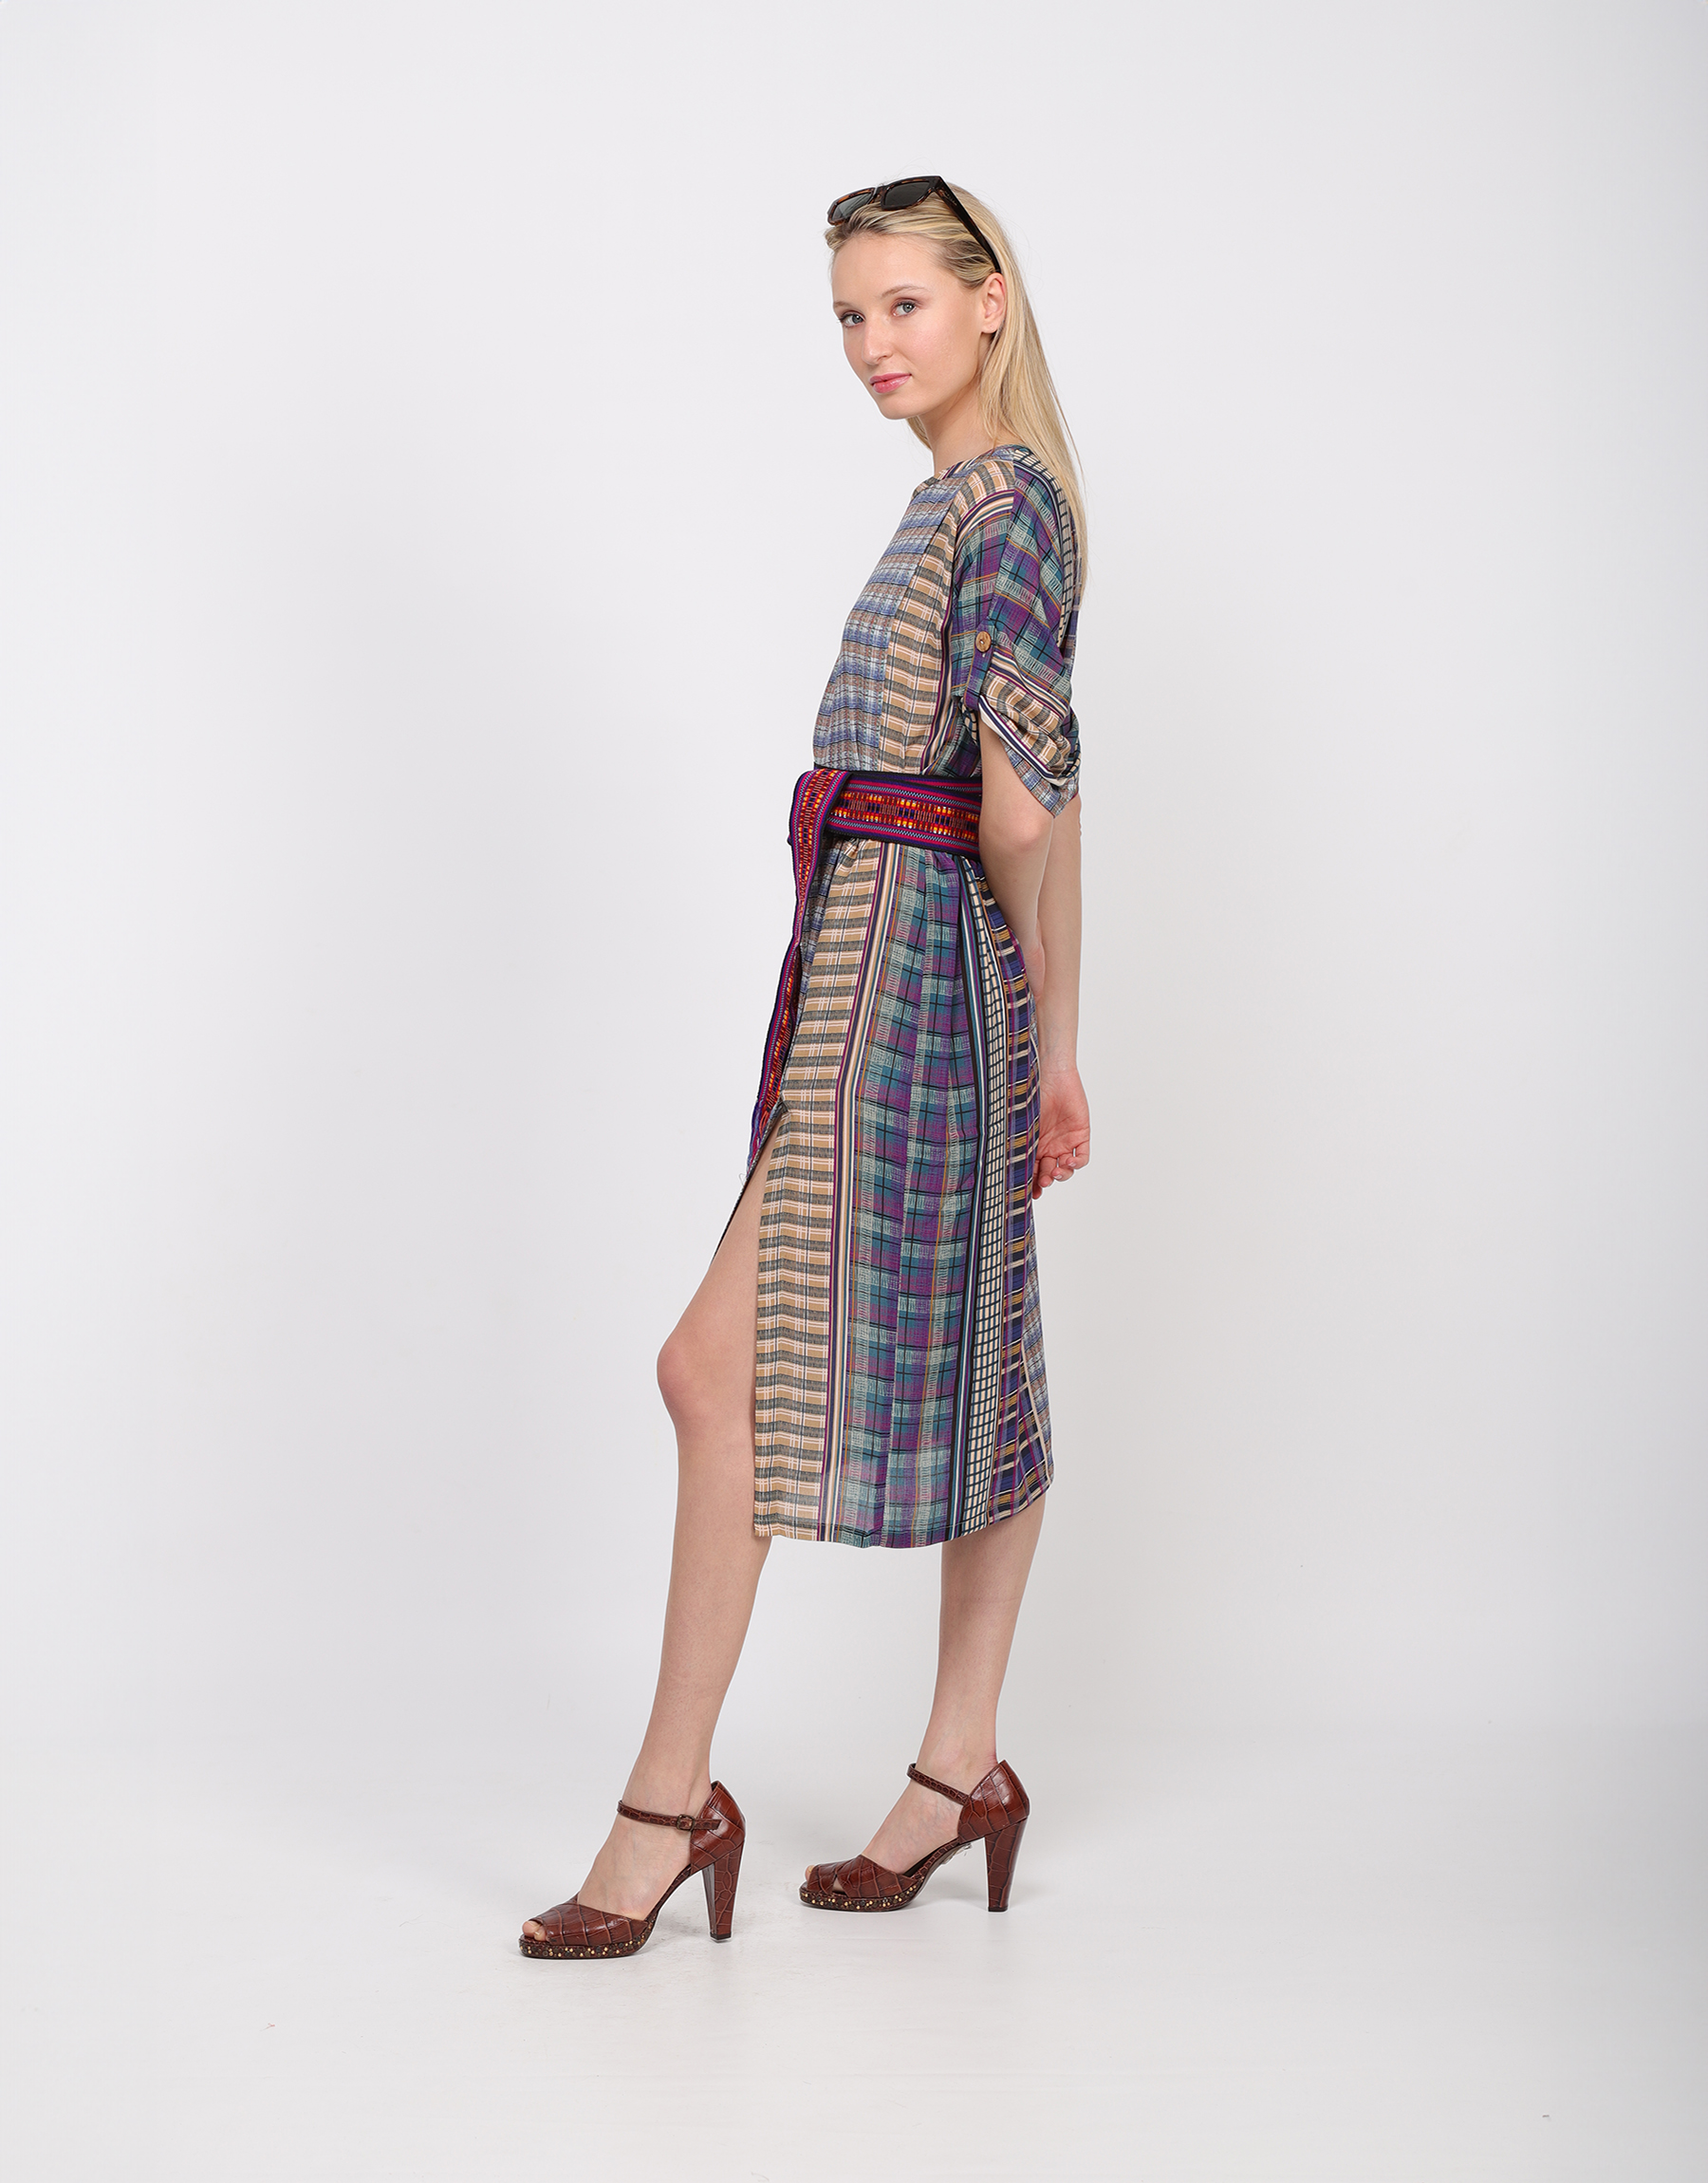 Flowing straight dress in patchwork madras printed viscose in shades of blue